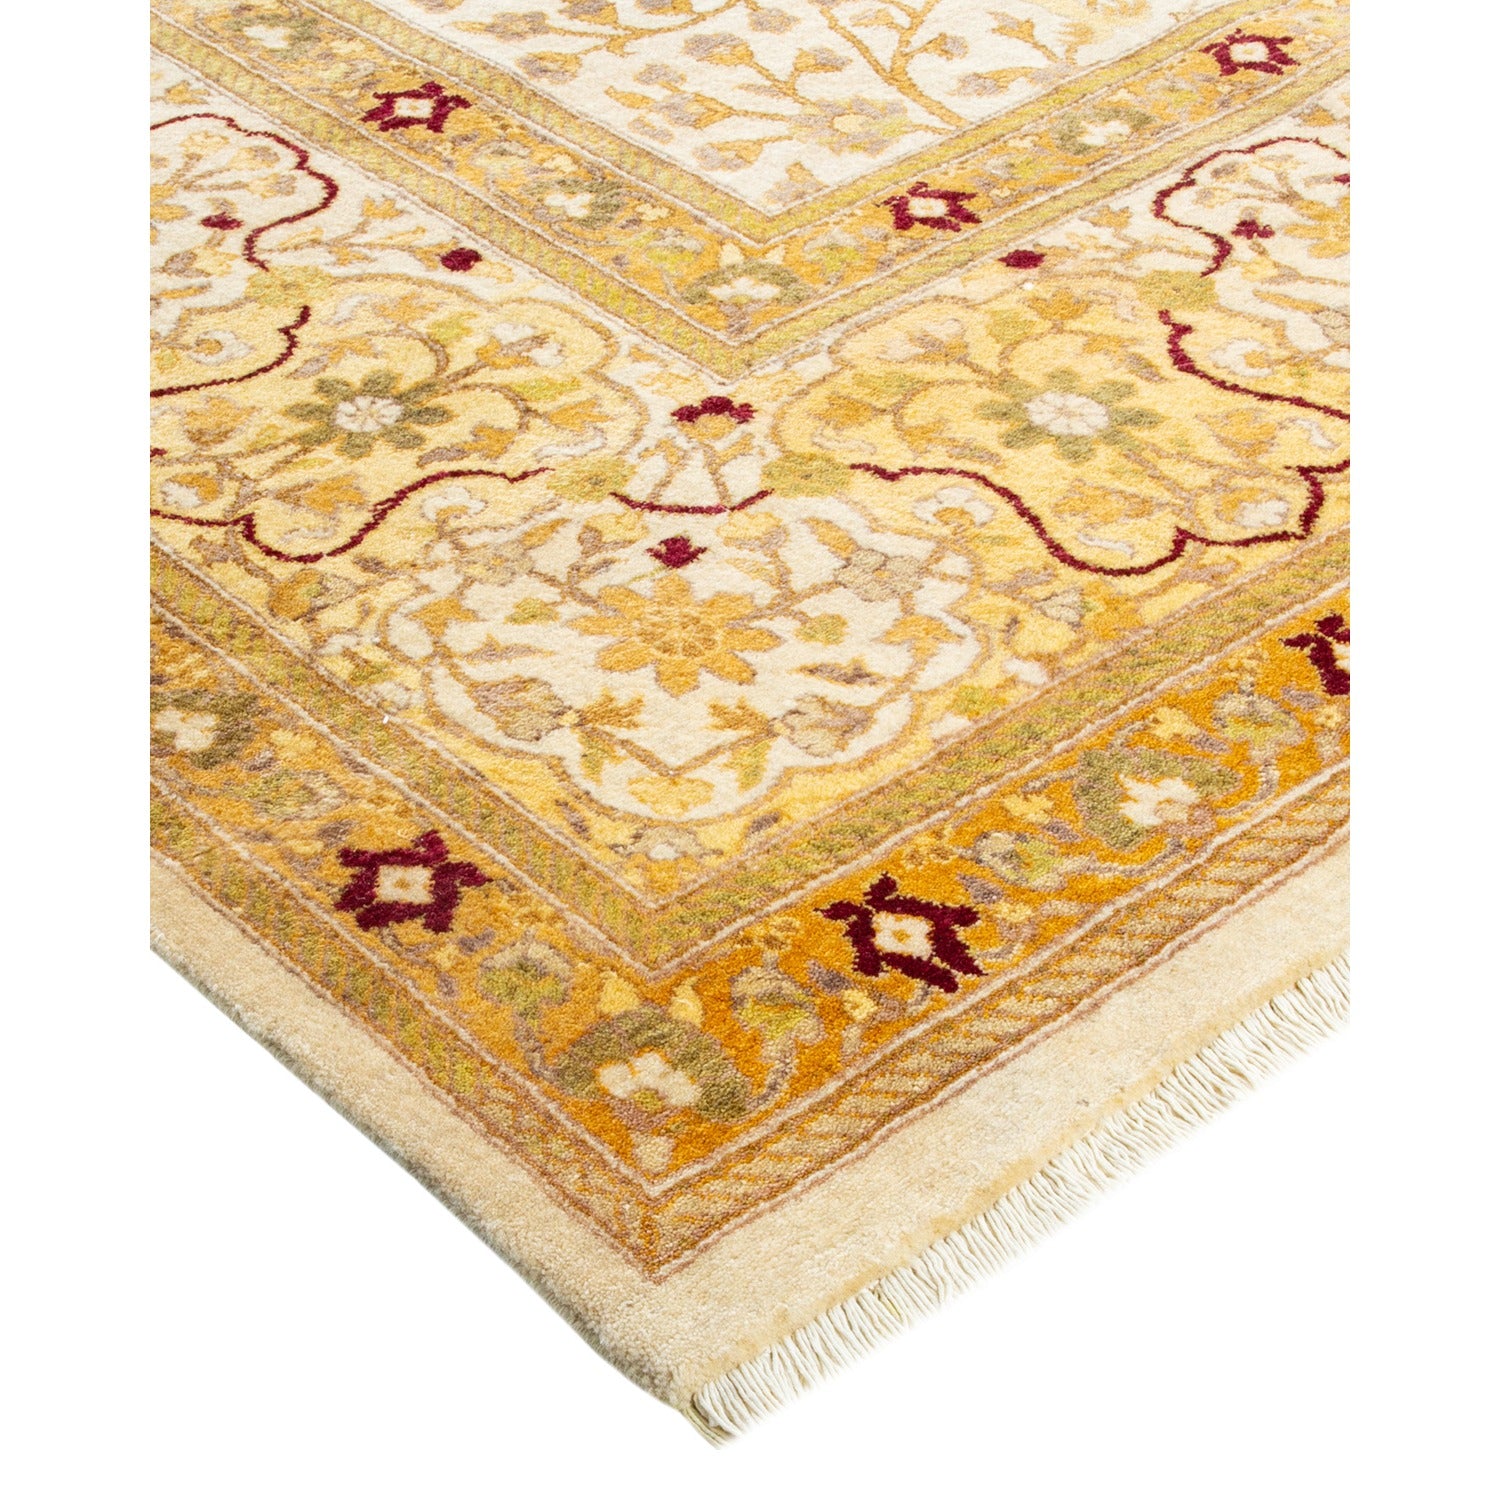 An ornate corner of a traditional rug with intricate patterns.